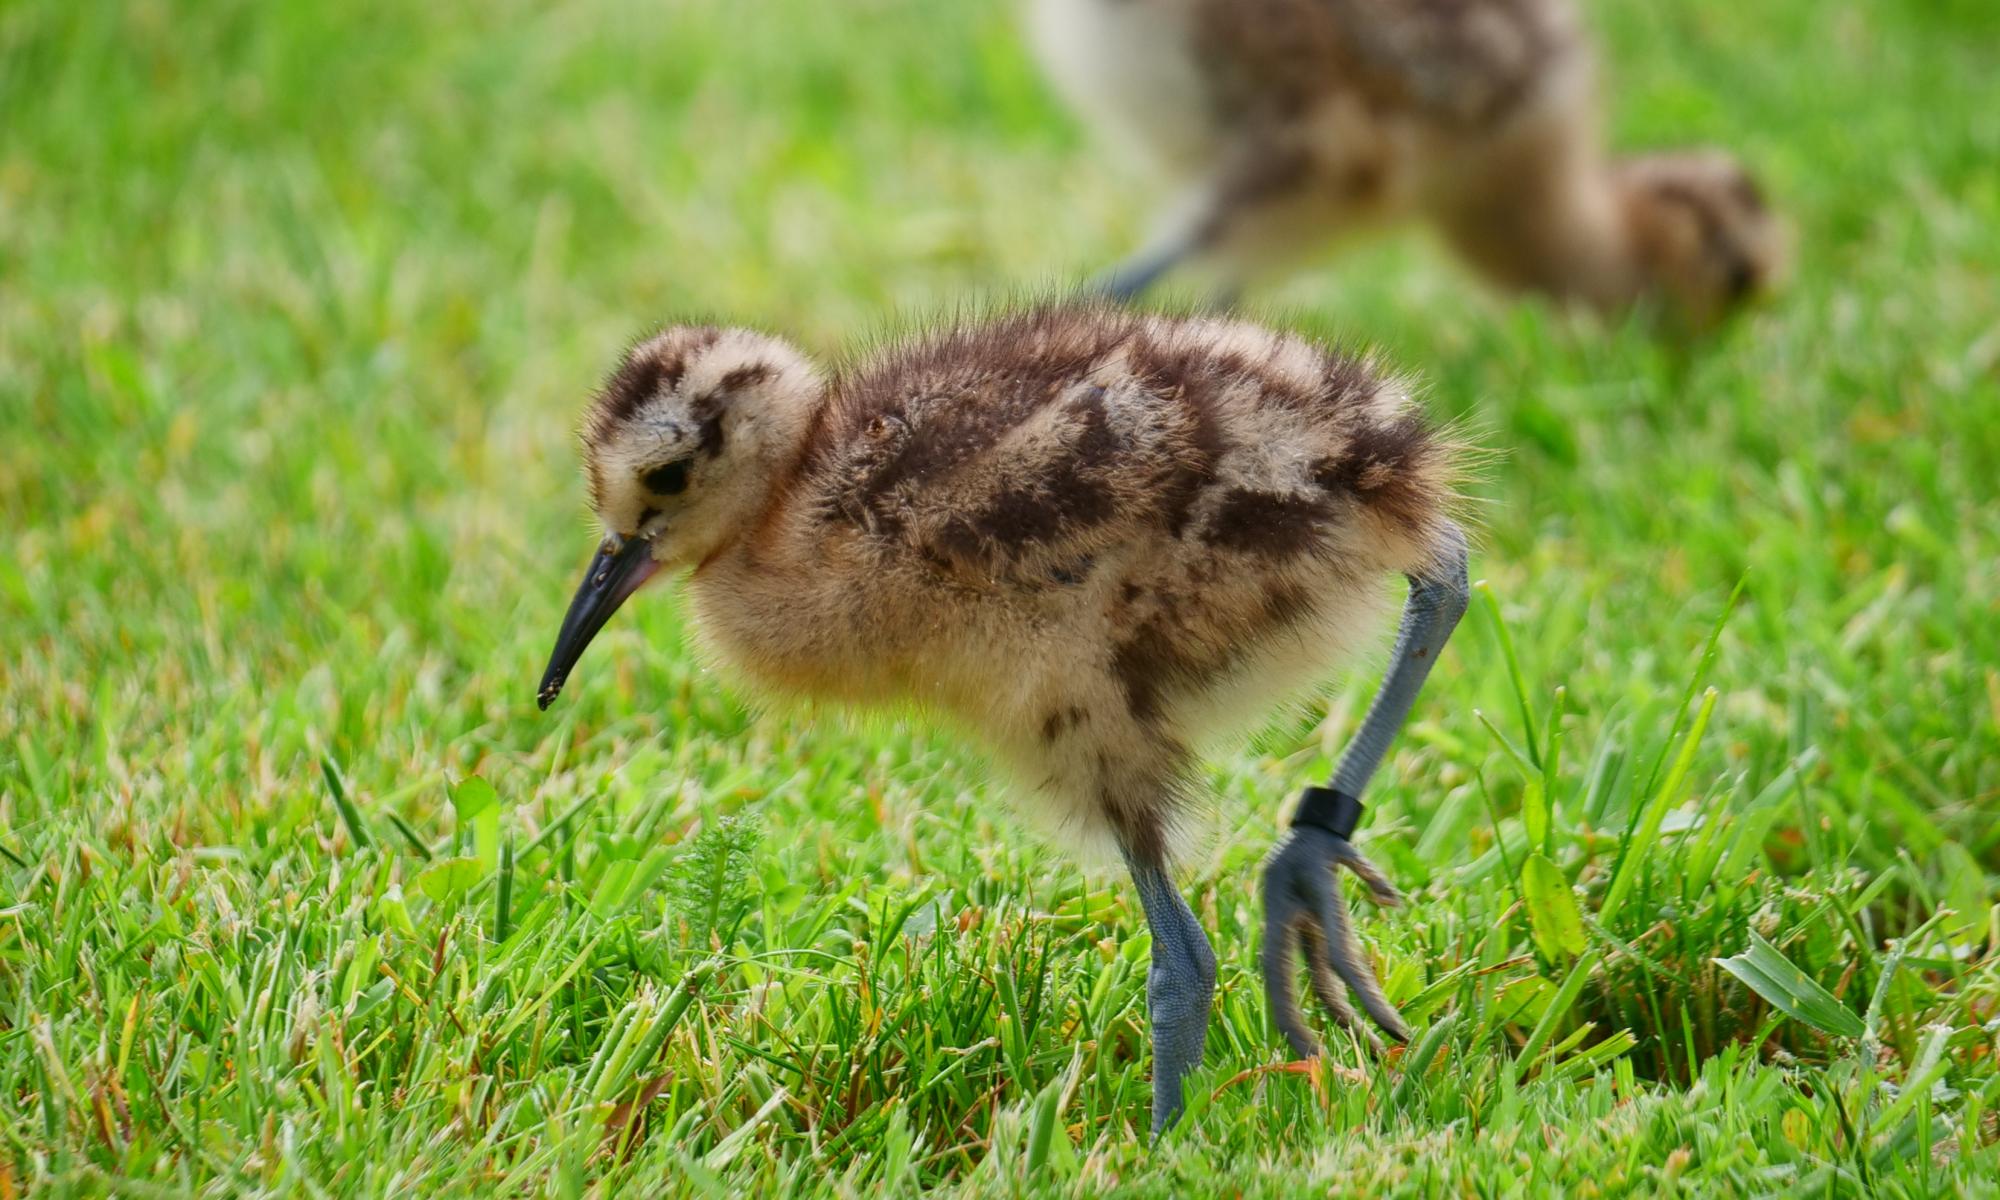  Ready for takeoff: curlews from eggs rescued at airfields set for release